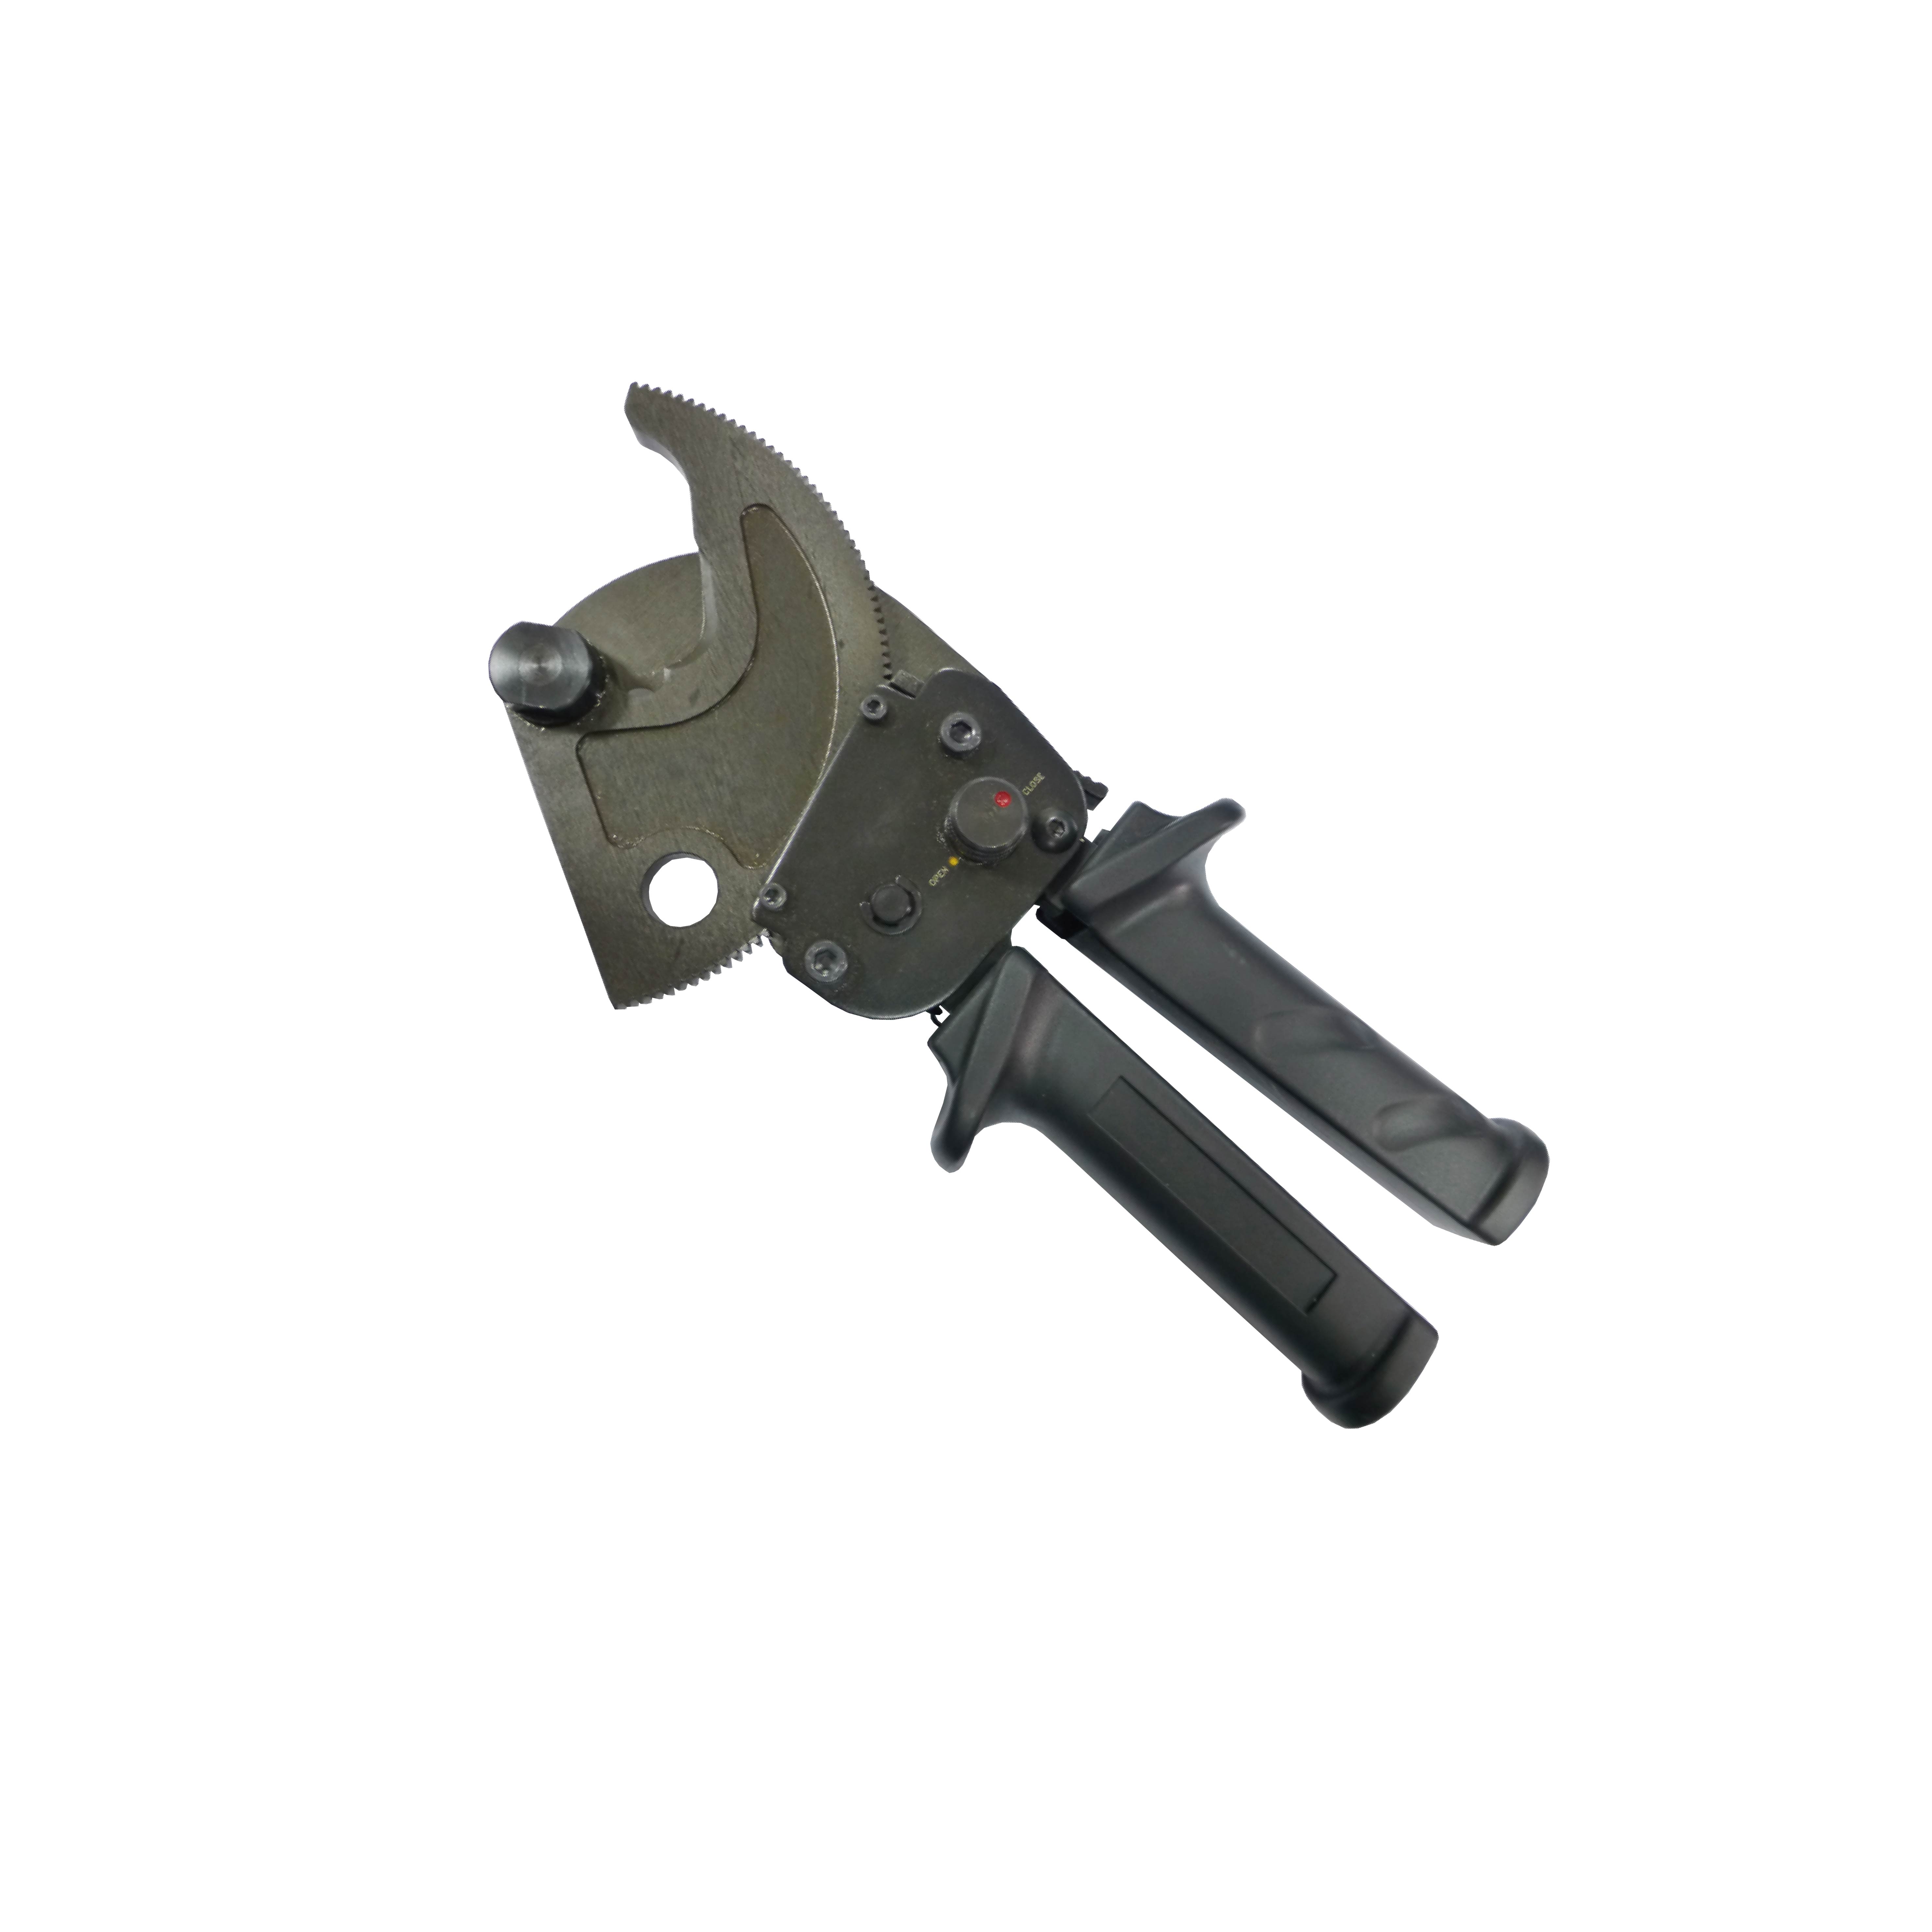 SC-16B HAND CABLE CUTTERS